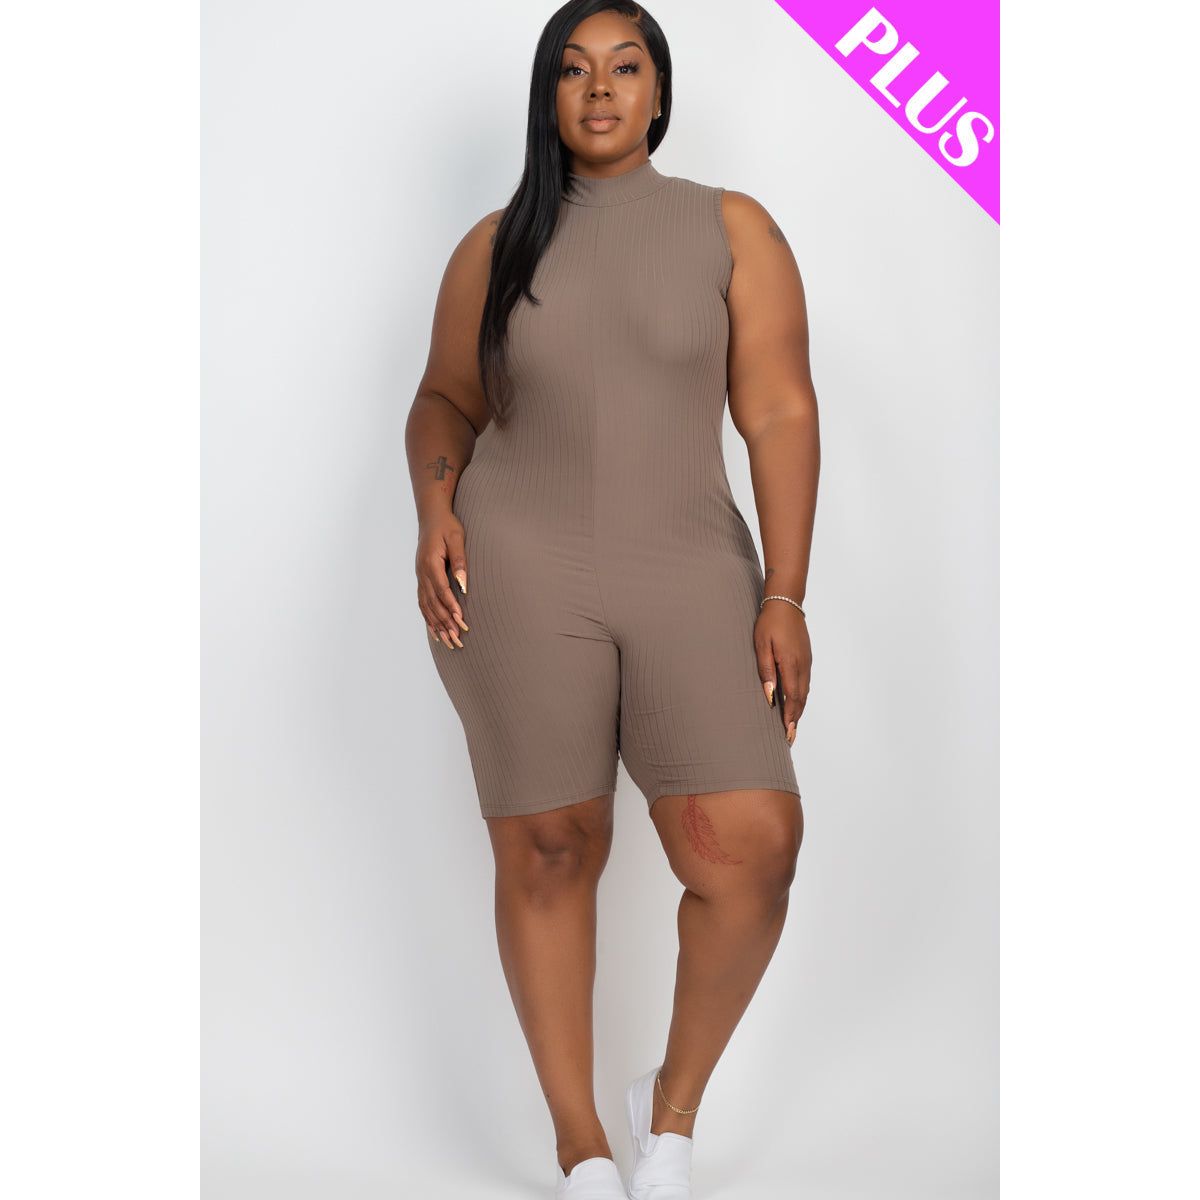 Fashion Freedom: Capella's Sleeveless Mock Neck Romper for Curves - KME means the very best